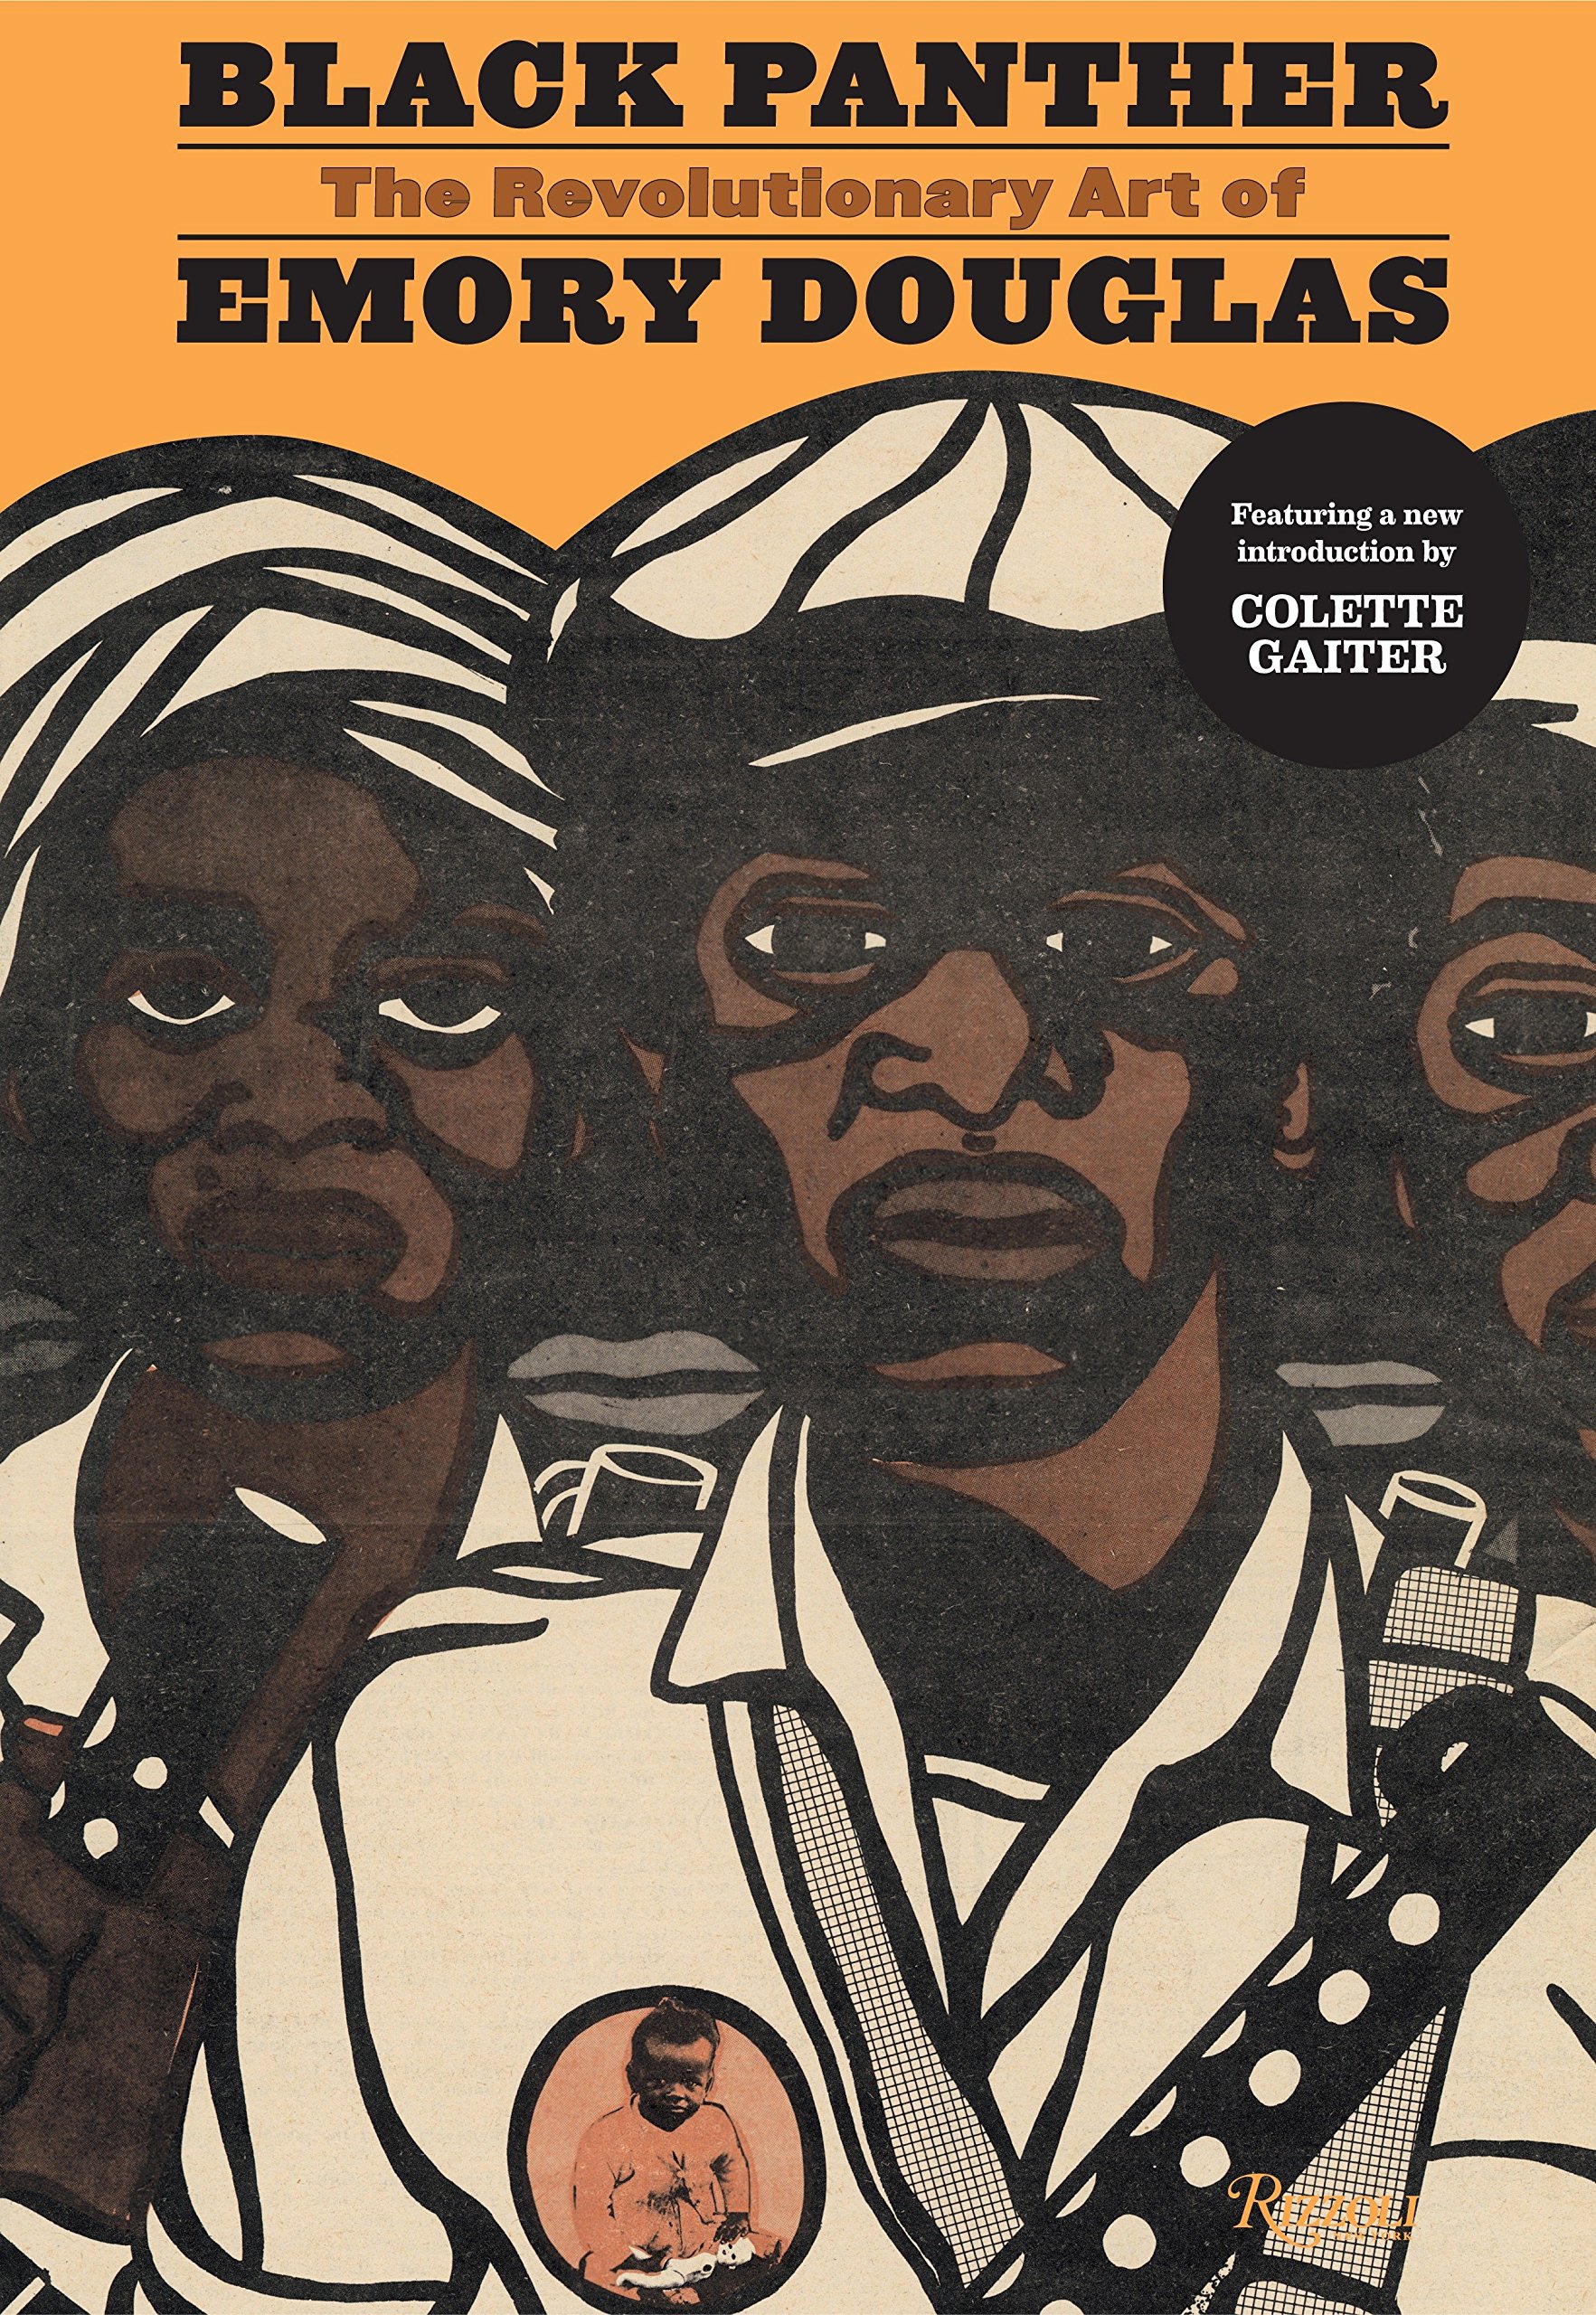 Book cover for Black Panther: The Revolutionary Art of Emory Douglas, showing three illustrations of black men